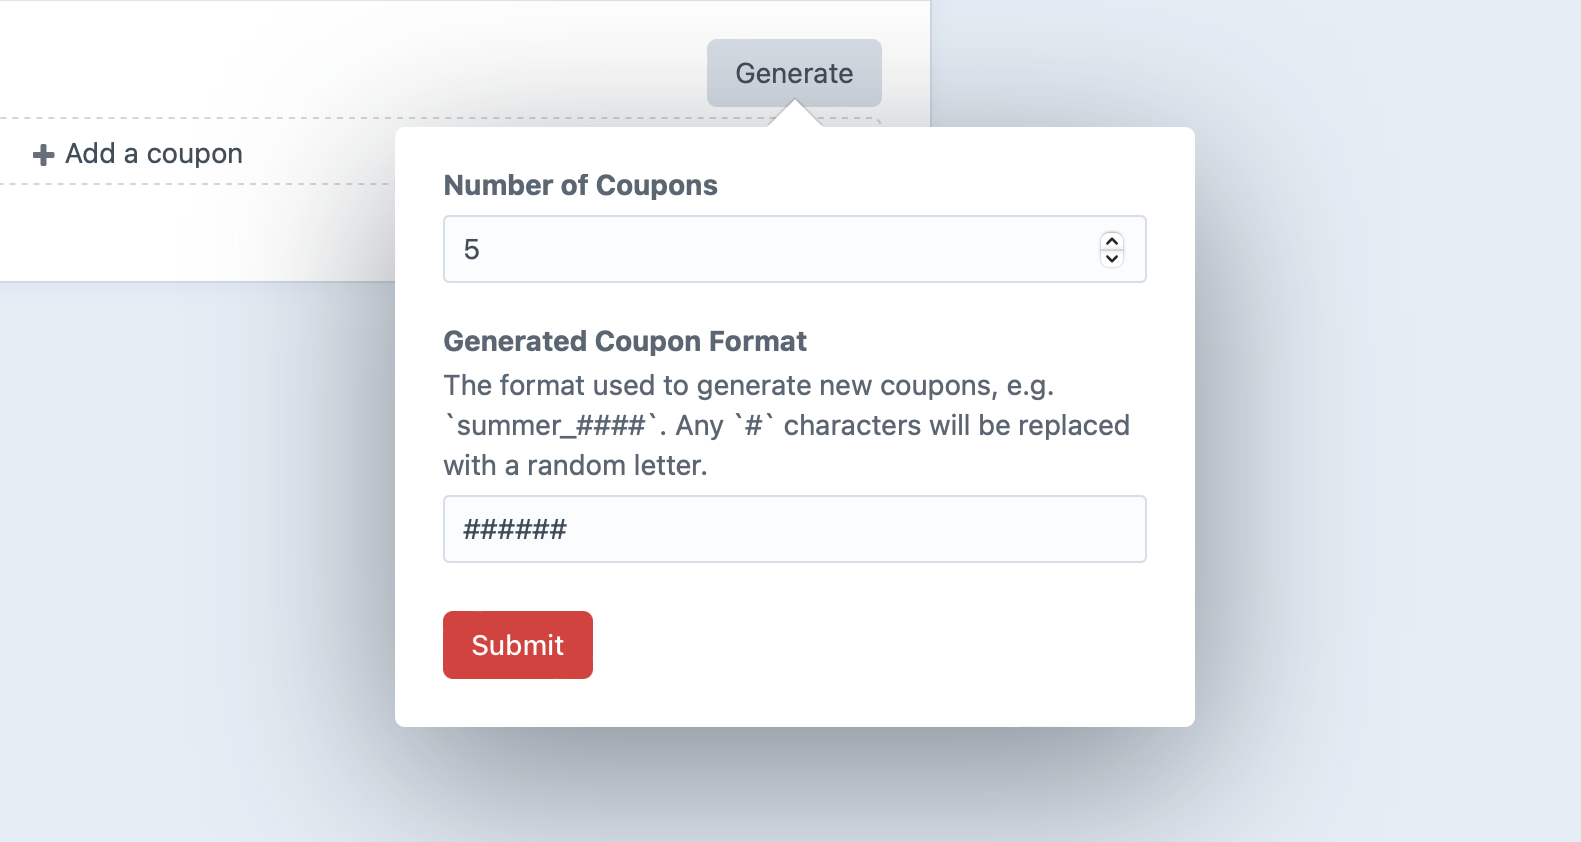 Screenshot of the “Generate” HUD, with a “Number of Coupons” field and a “Generated Coupon Format” field